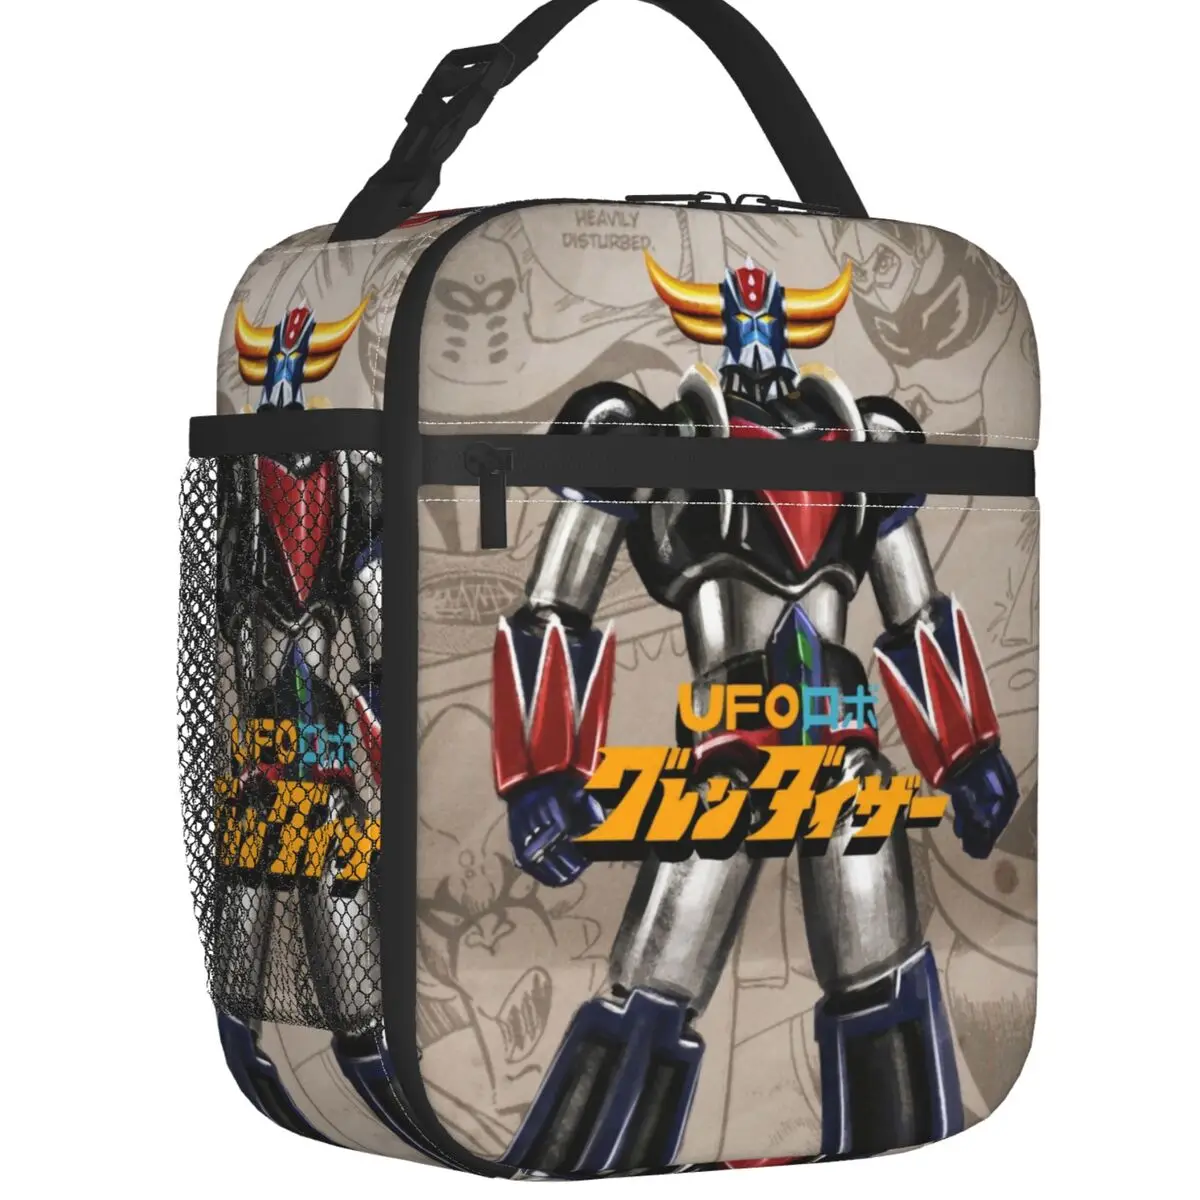 Grendizer Anime Insulated Lunch Bags for Women UFO Robot Goldorak Portable Cooler Thermal Bento Box Work School Travel